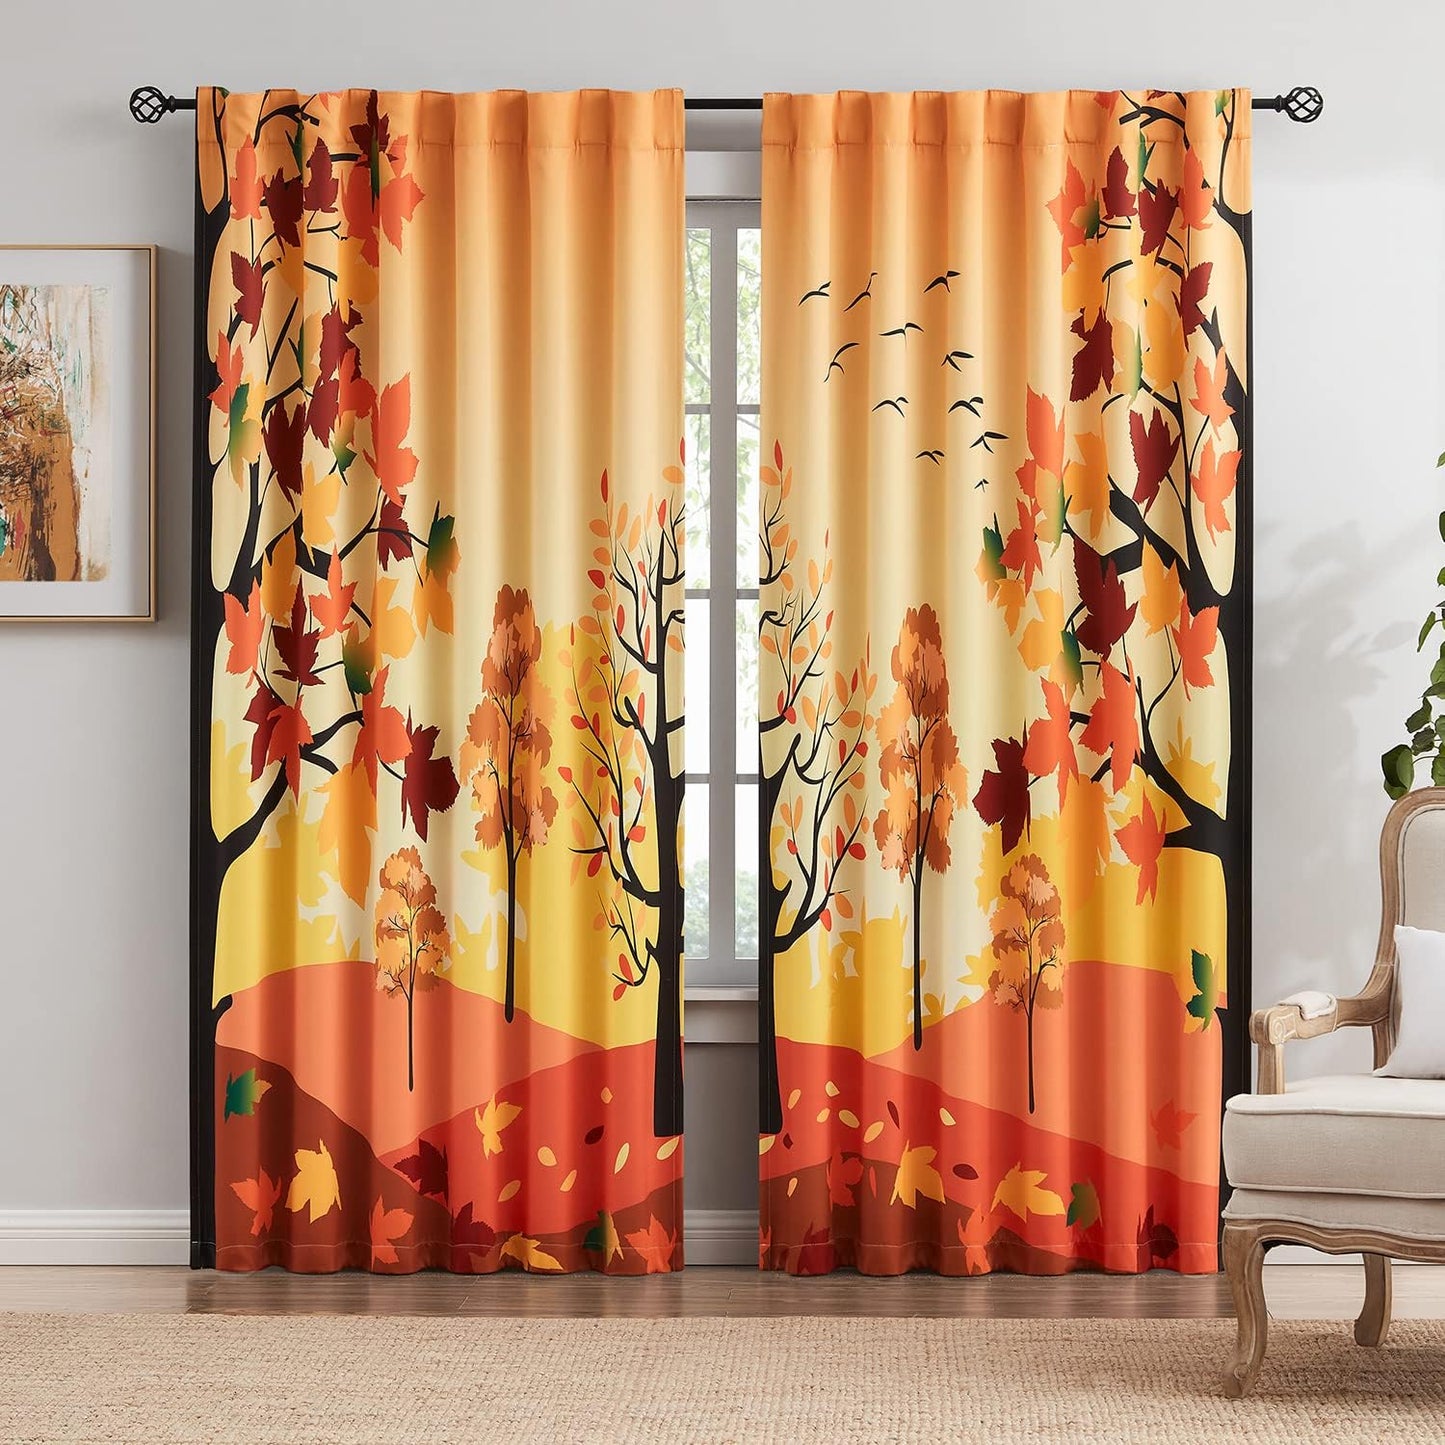 FMFUNCTEX Metallic Tree Blackout Curtains Bedroom Grey 84-Inch Living-Room Branch Print Curtain Panels Forest Triple Weave Thermal Insulated Drapes for Windows Dorm Hotel Grommet Top, 2Panels  Fmfunctex Orange 50"W X 84"L 2Pcs 